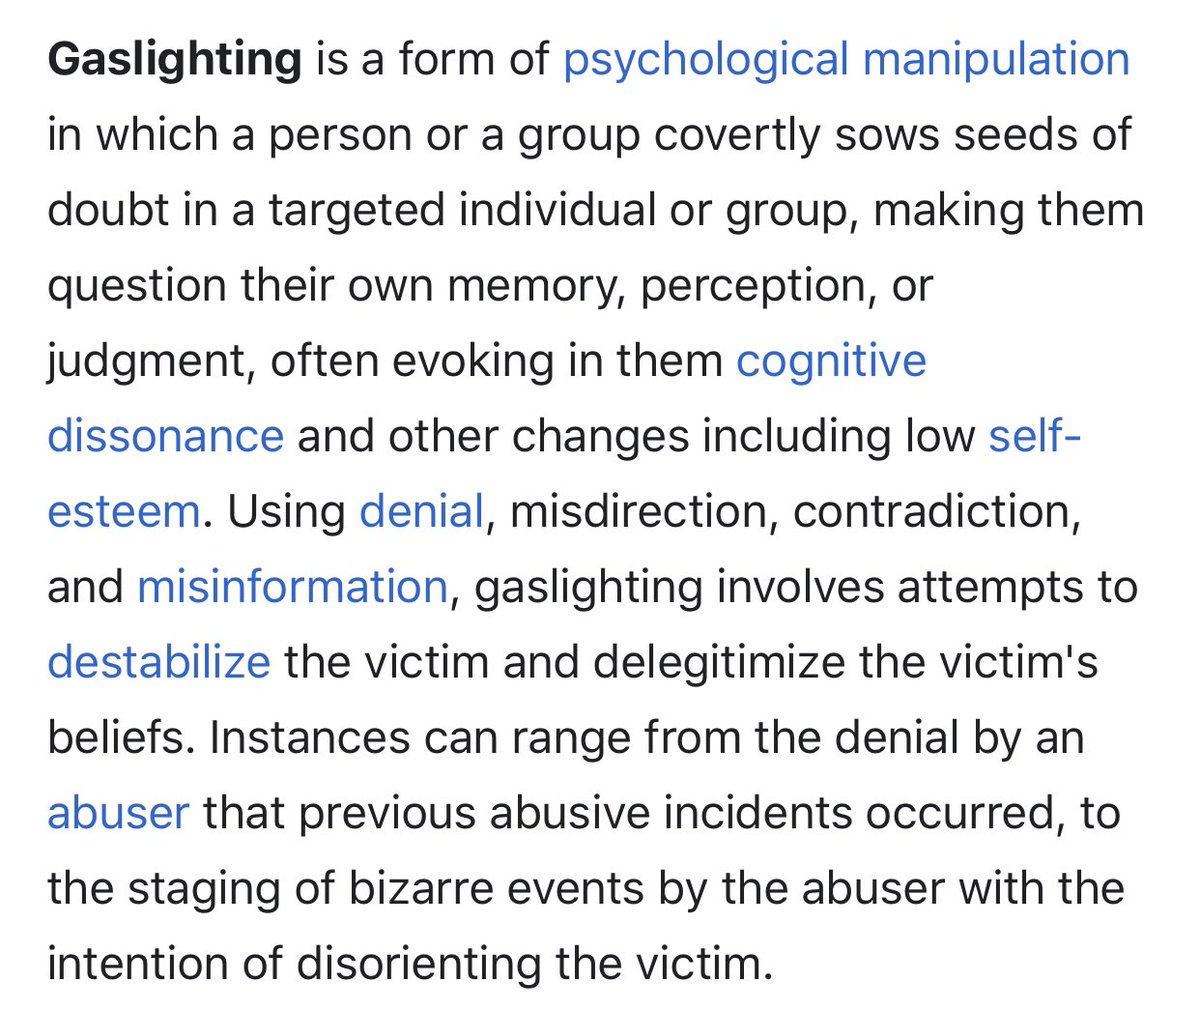 We are witnessing the largest gaslighting attempt in recorded history. Whitey, READ THIS.  This is what the media, politicians, athletes, Pedowood, THIS is what they are doing. You are not crazy. This is a (well planned) attempt at demoralizing you and making you GO crazy.